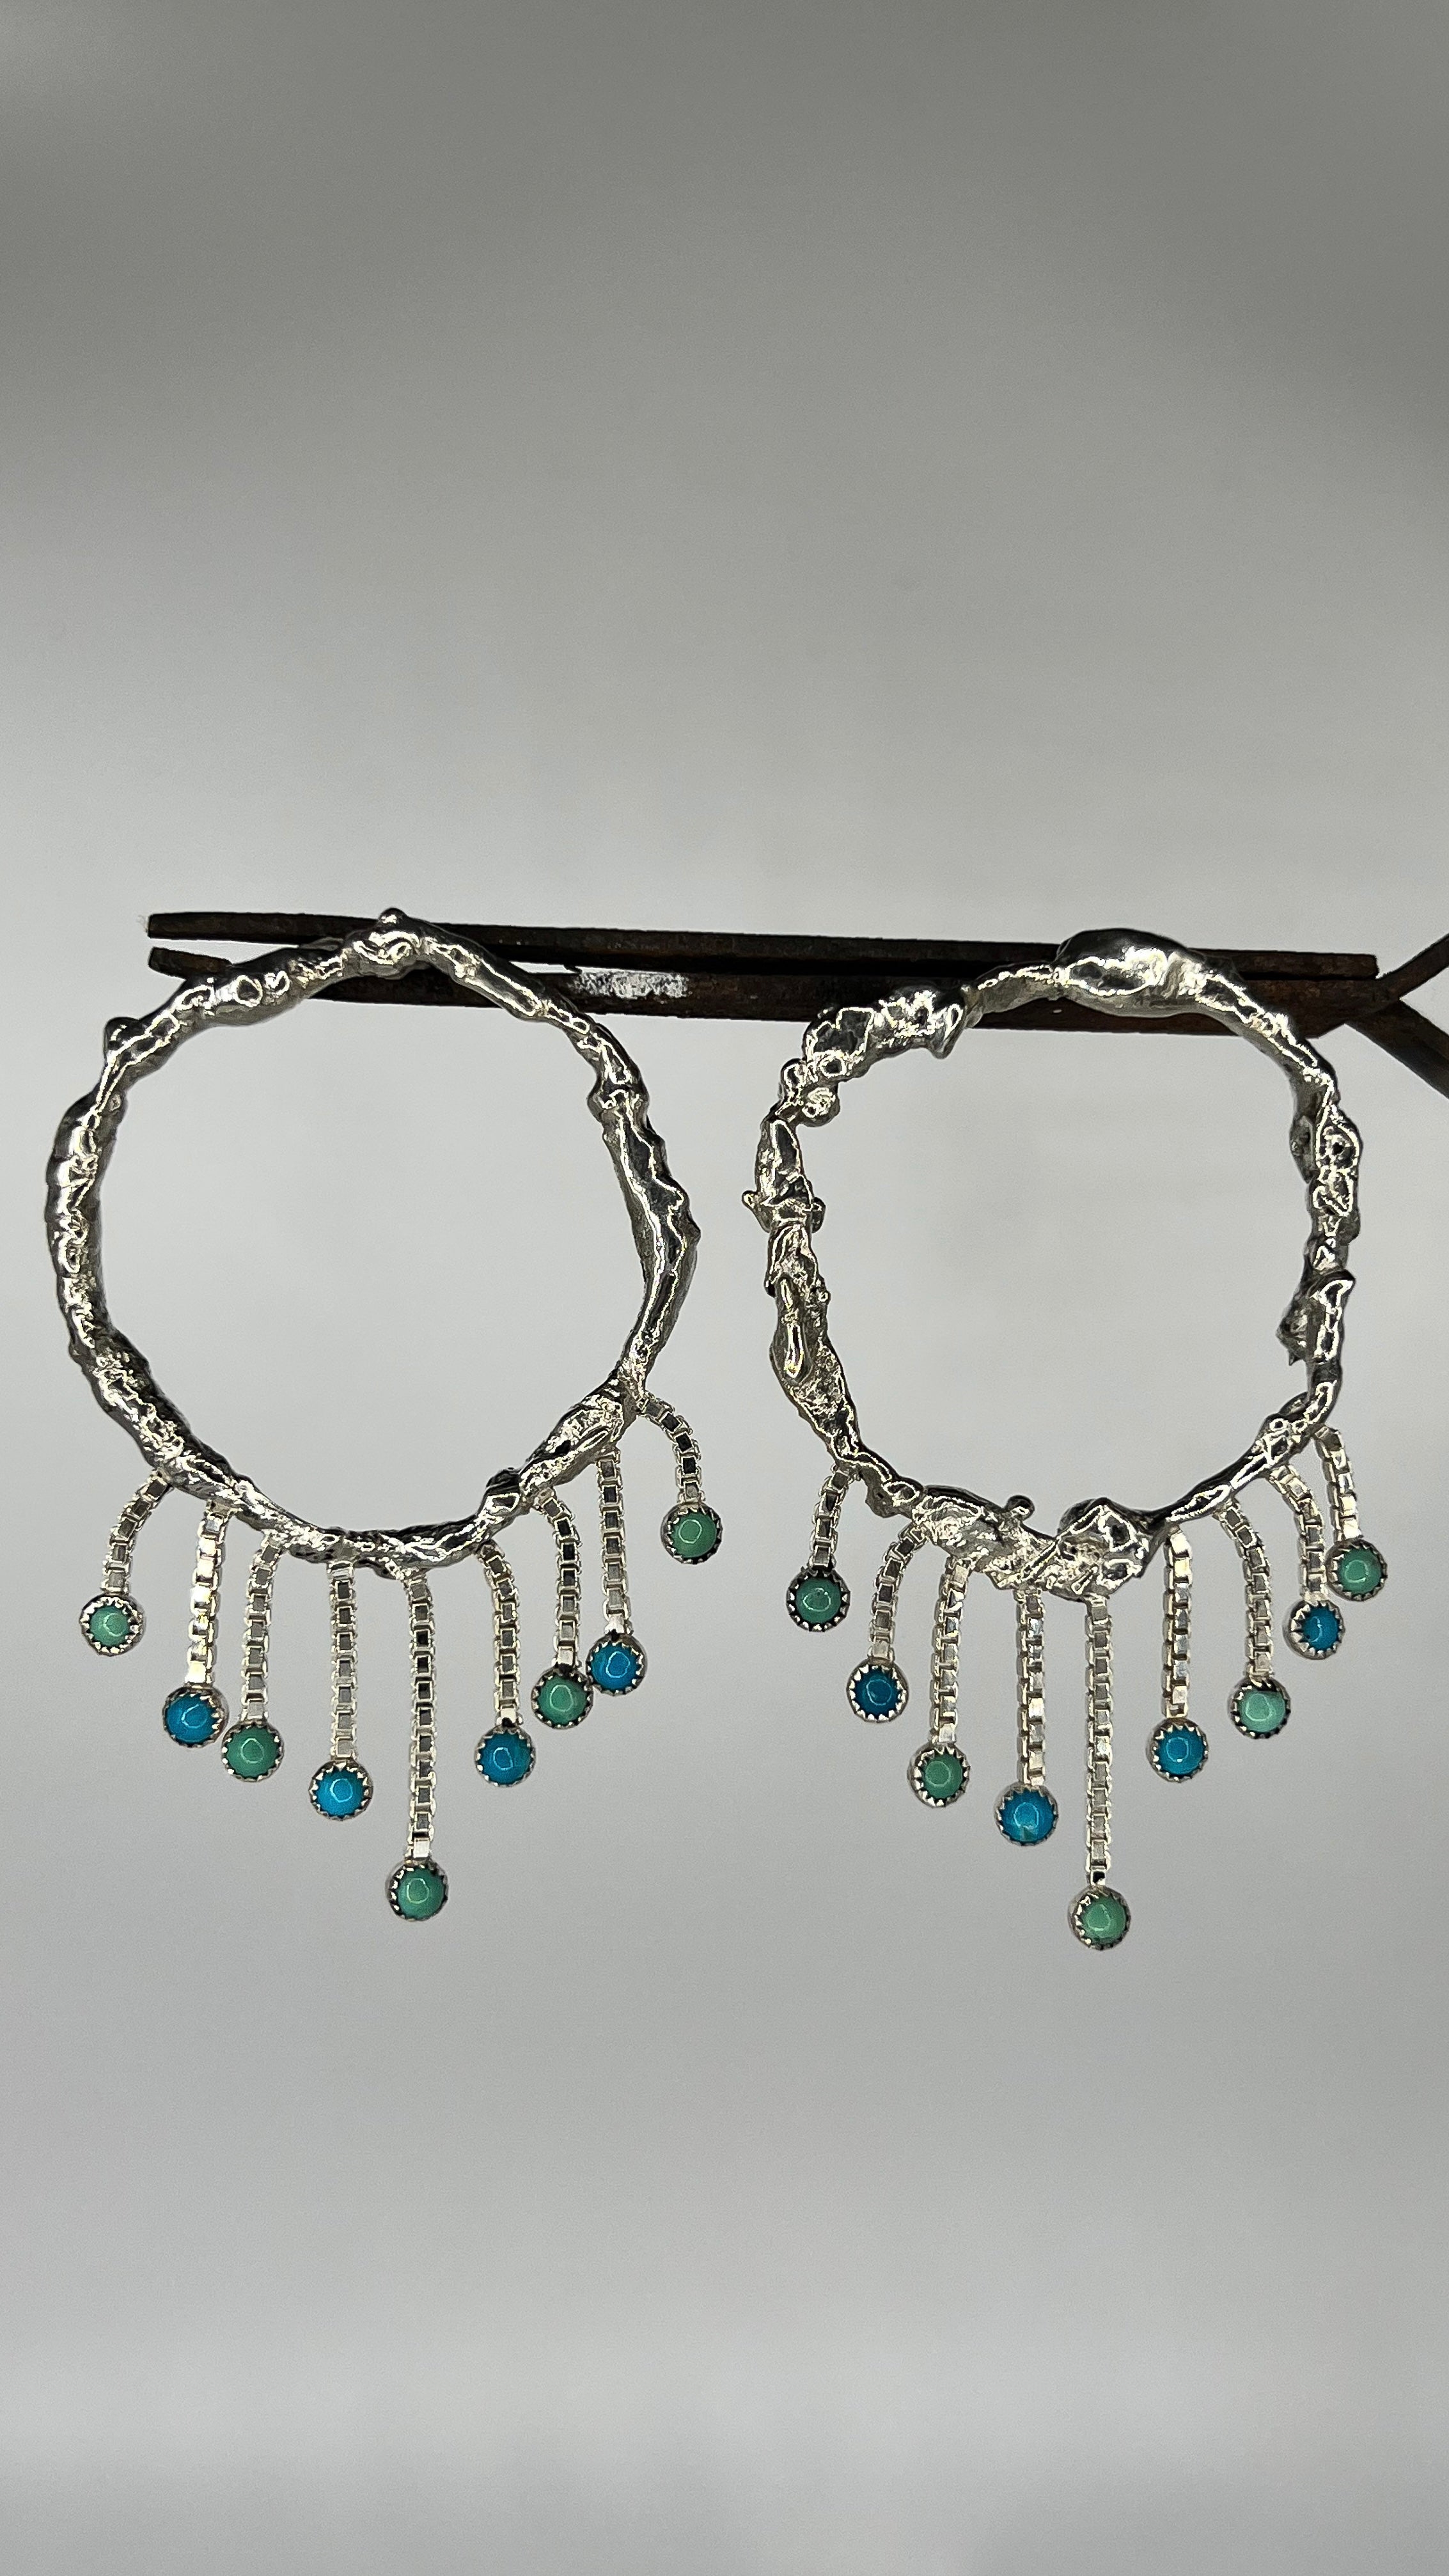 Dripping in Turquoise Hoops